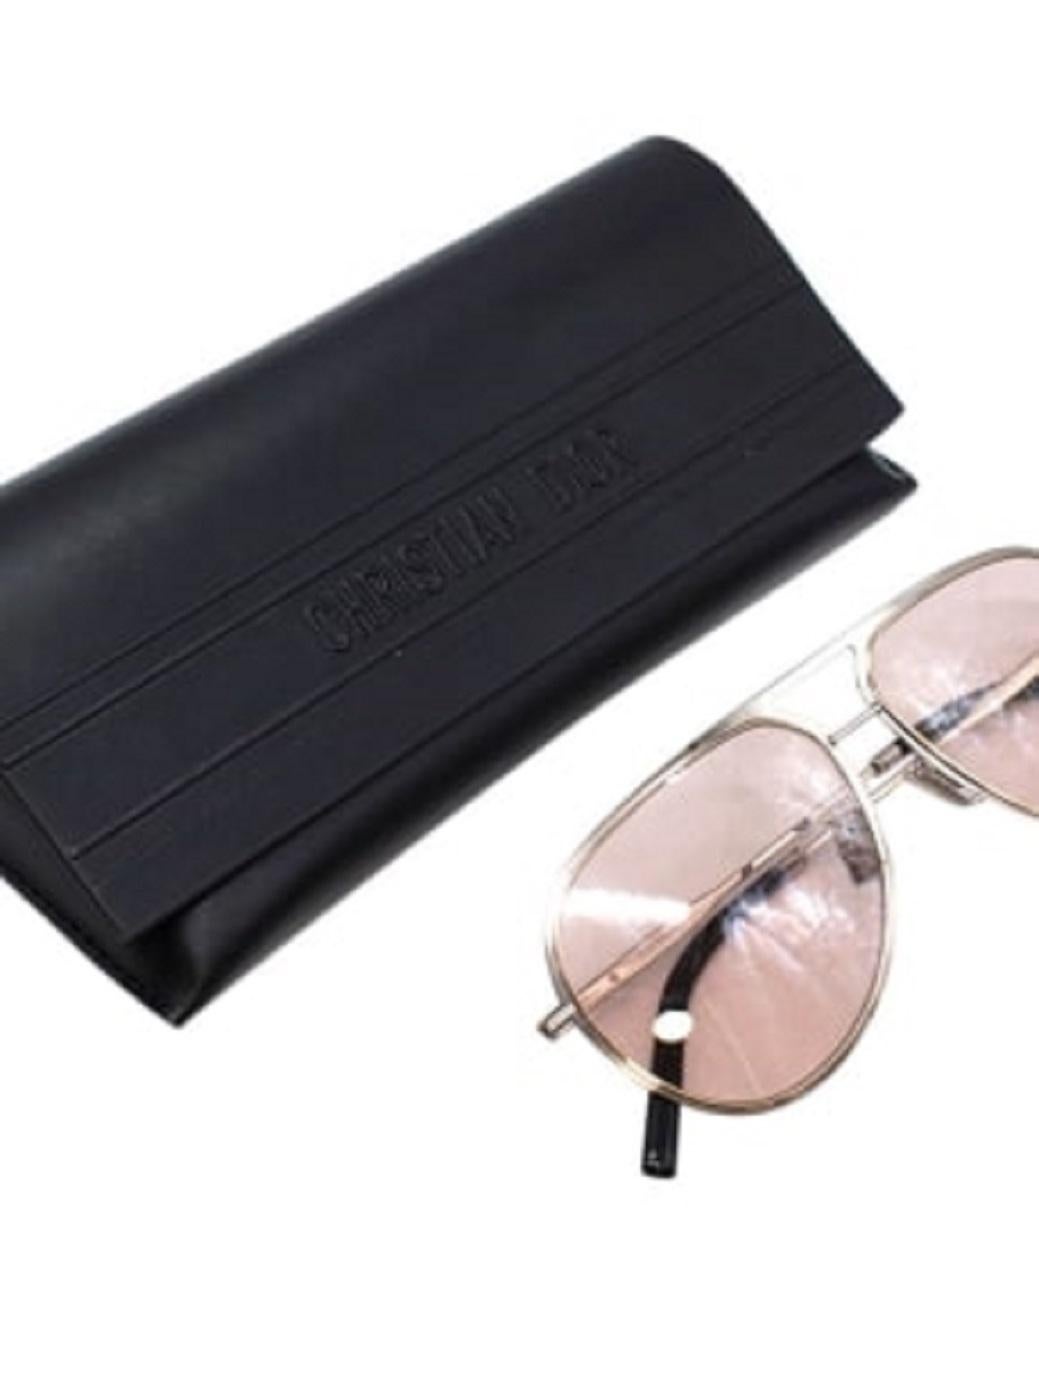 Dior DiorEssential 60MM DiorOblique Lens Metal Aviator Sunglasses

- Silver and gold trim
- Dior monogram lenses
- Pink tinted lenses
- Silver-toned temples

Material
Metal and acetate

Made in Italy

9.5/10 Excellent condition

PLEASE NOTE, THESE